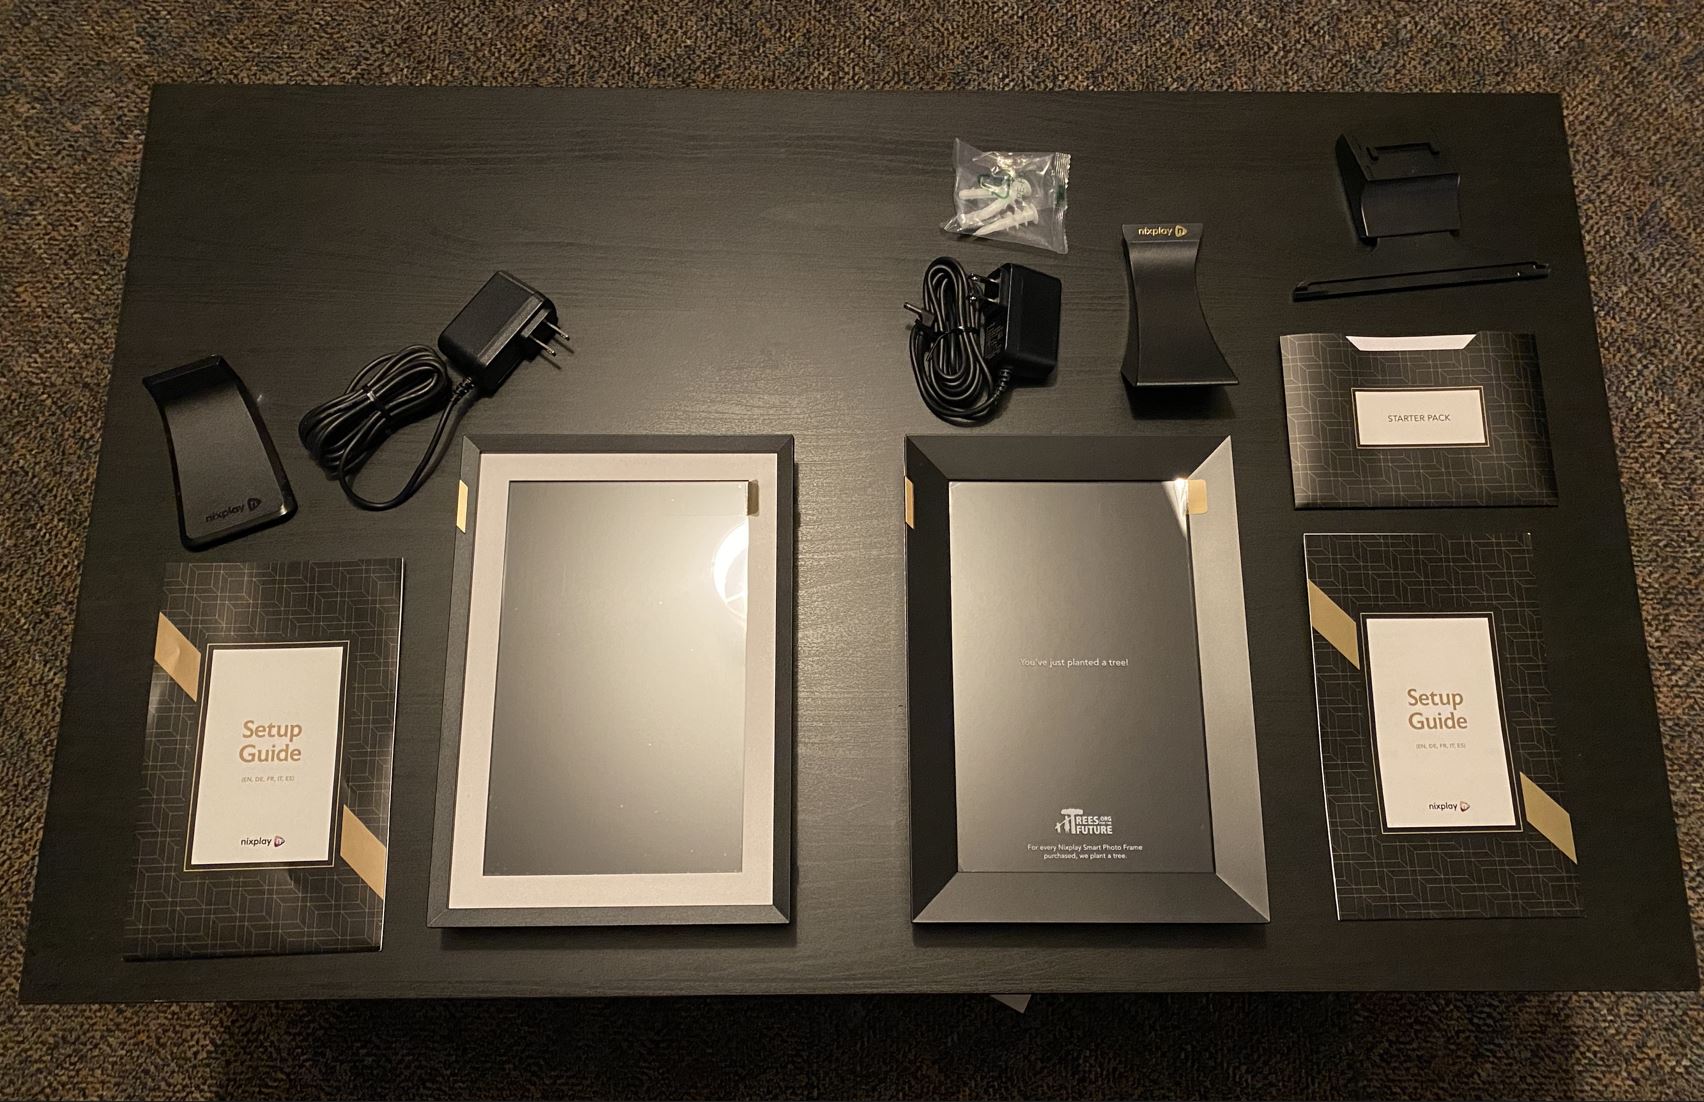 Instruction manual and parts of both Classic white and New Black Touch 10 Smart Frames by Nixplay on a black coffee table